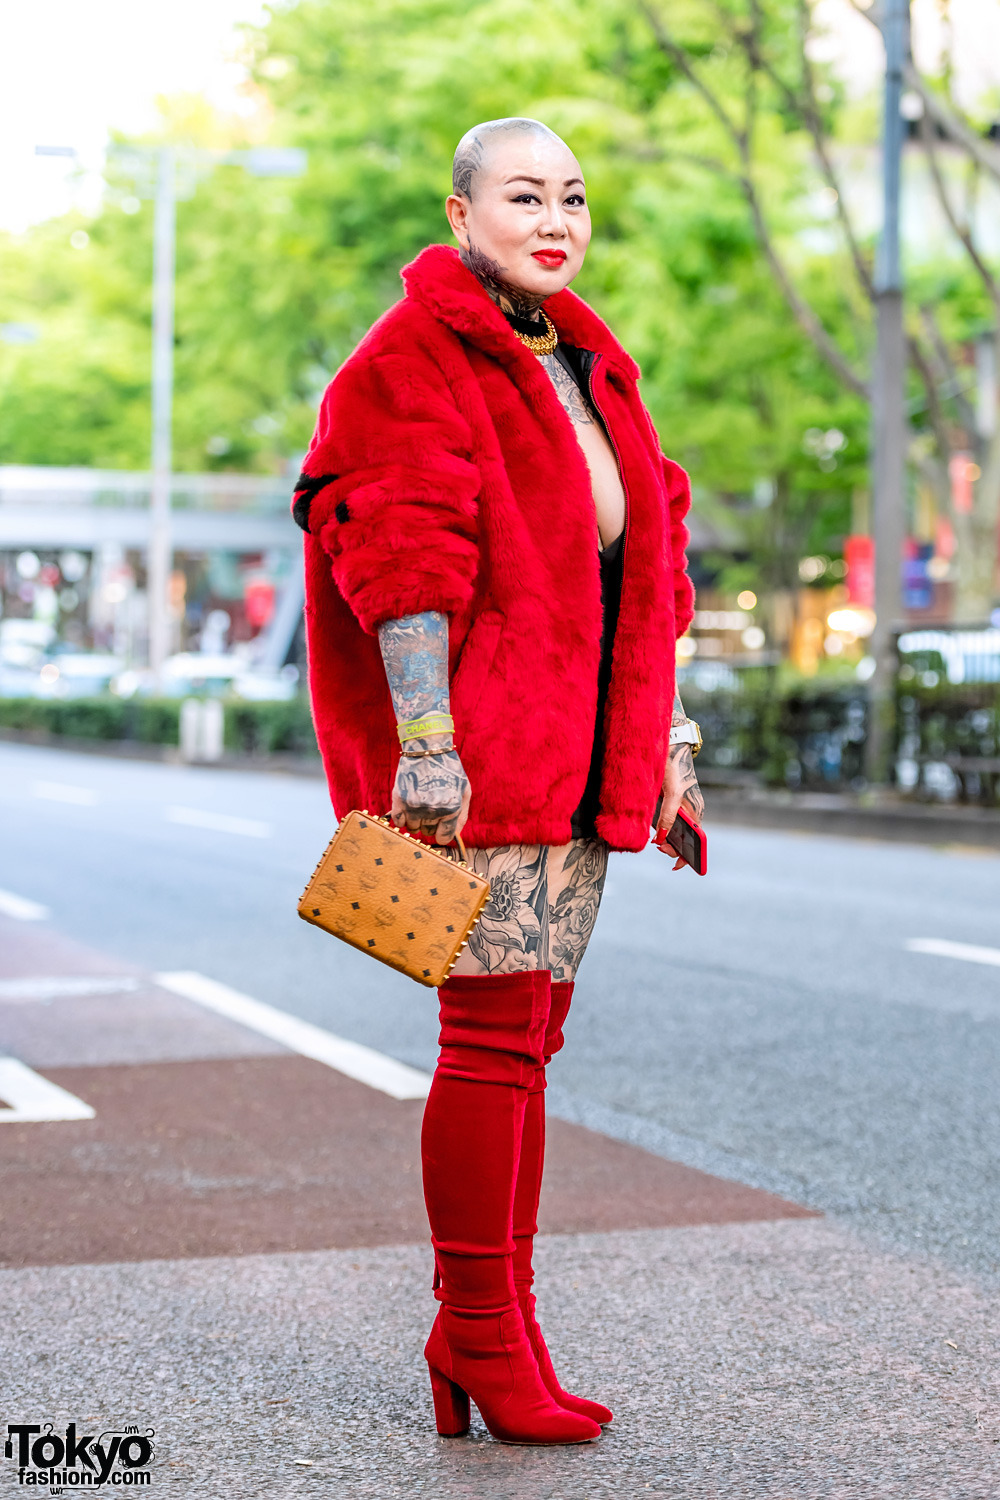 tokyo-fashion:Fashion boutique owner Amy on the street in Harajuku wearing a red